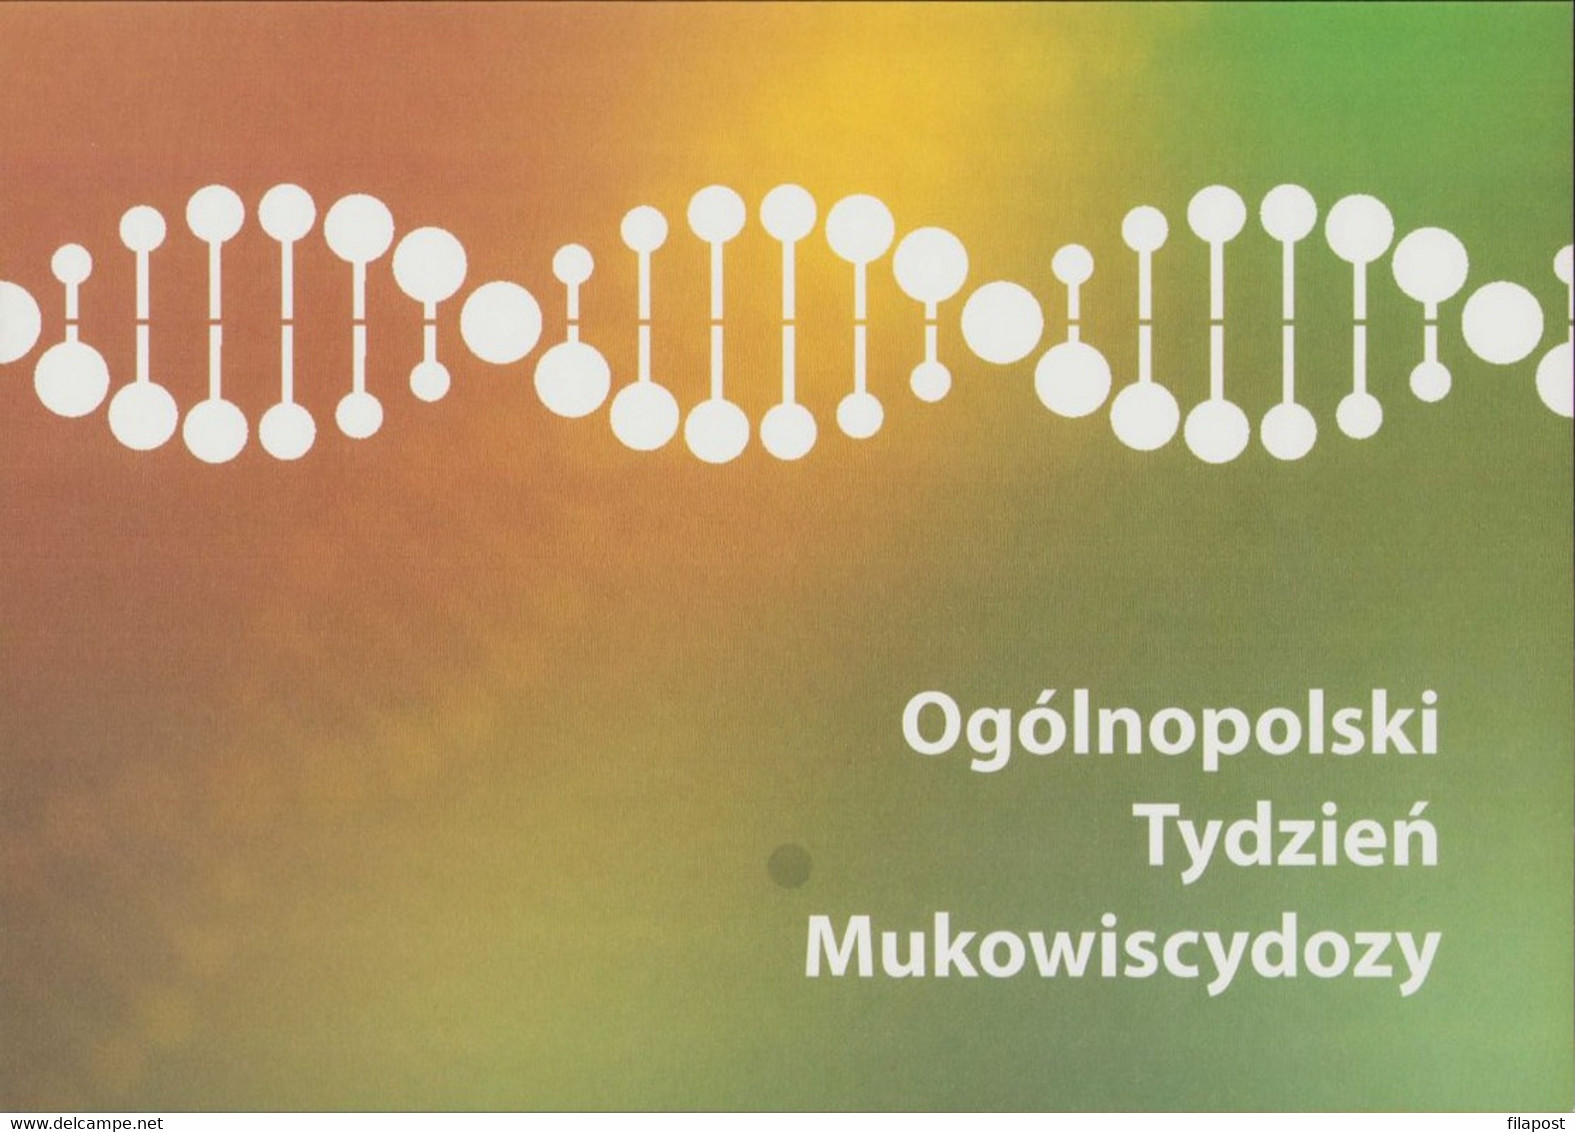 POLAND 2011 Booklet / Polish Nationwide Week Of Cystic Fibrosis Genetic Disease, Child, Tree, DNA / Stamp + FDC - Cuadernillos